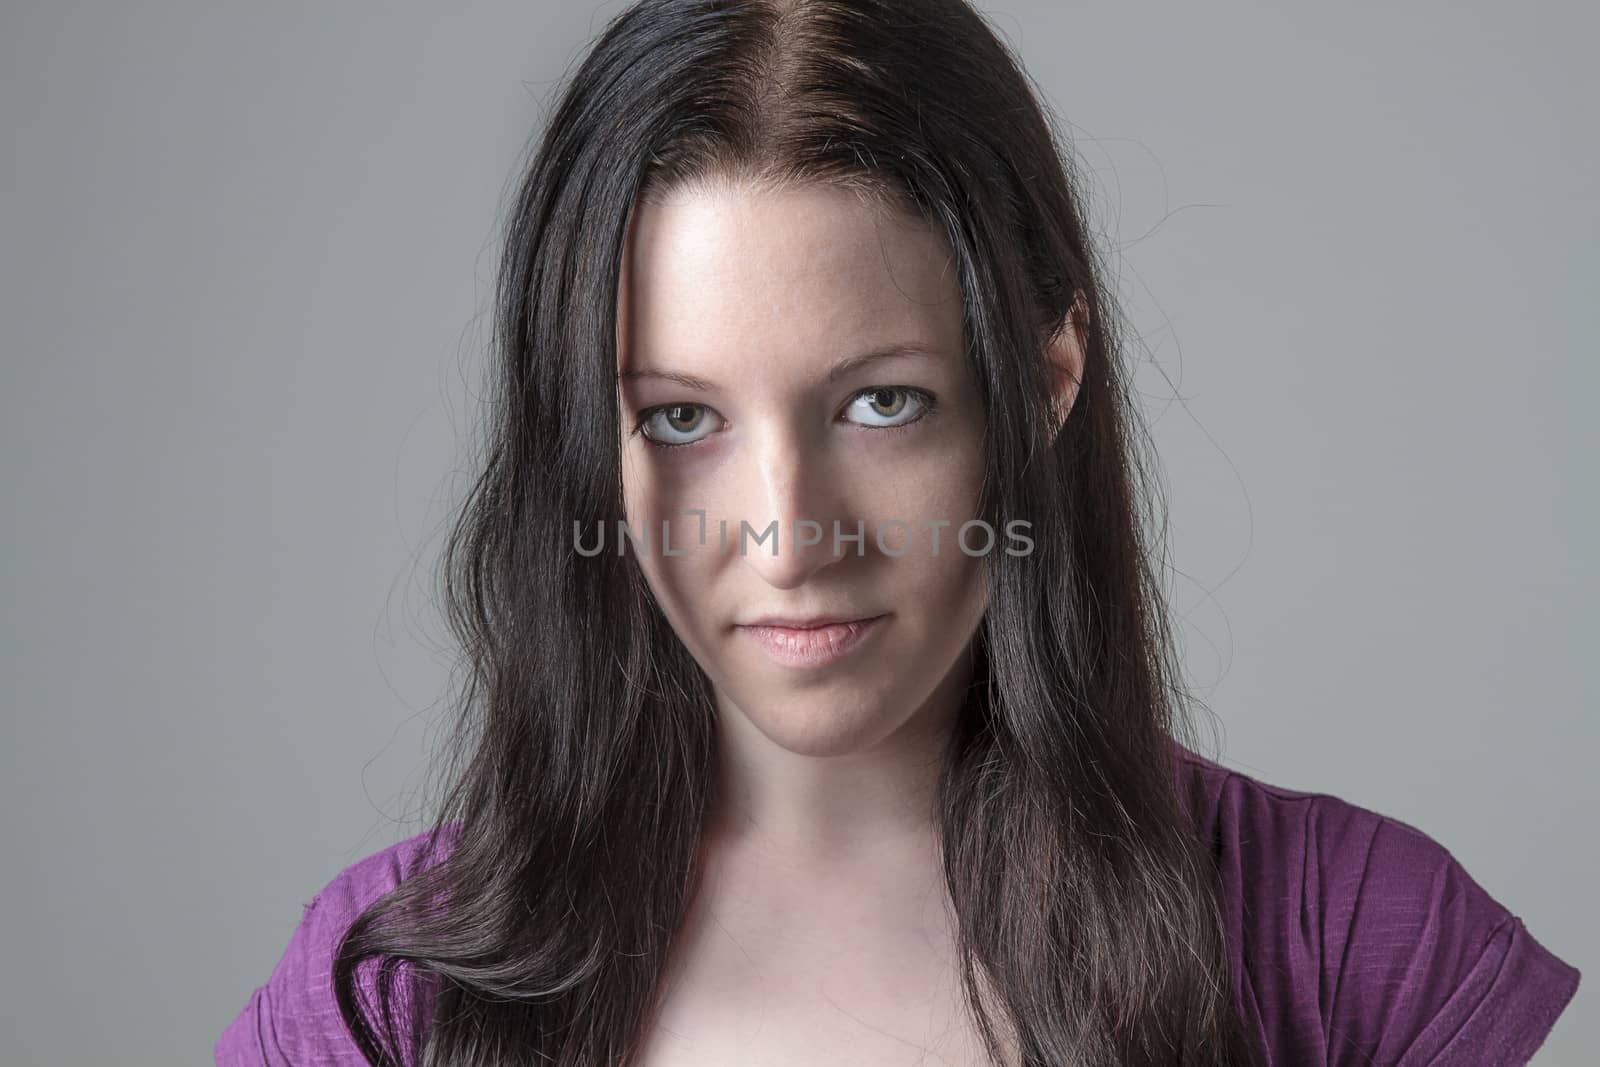 Young woman in purple shirt against a gray background, looking deeply into the camera